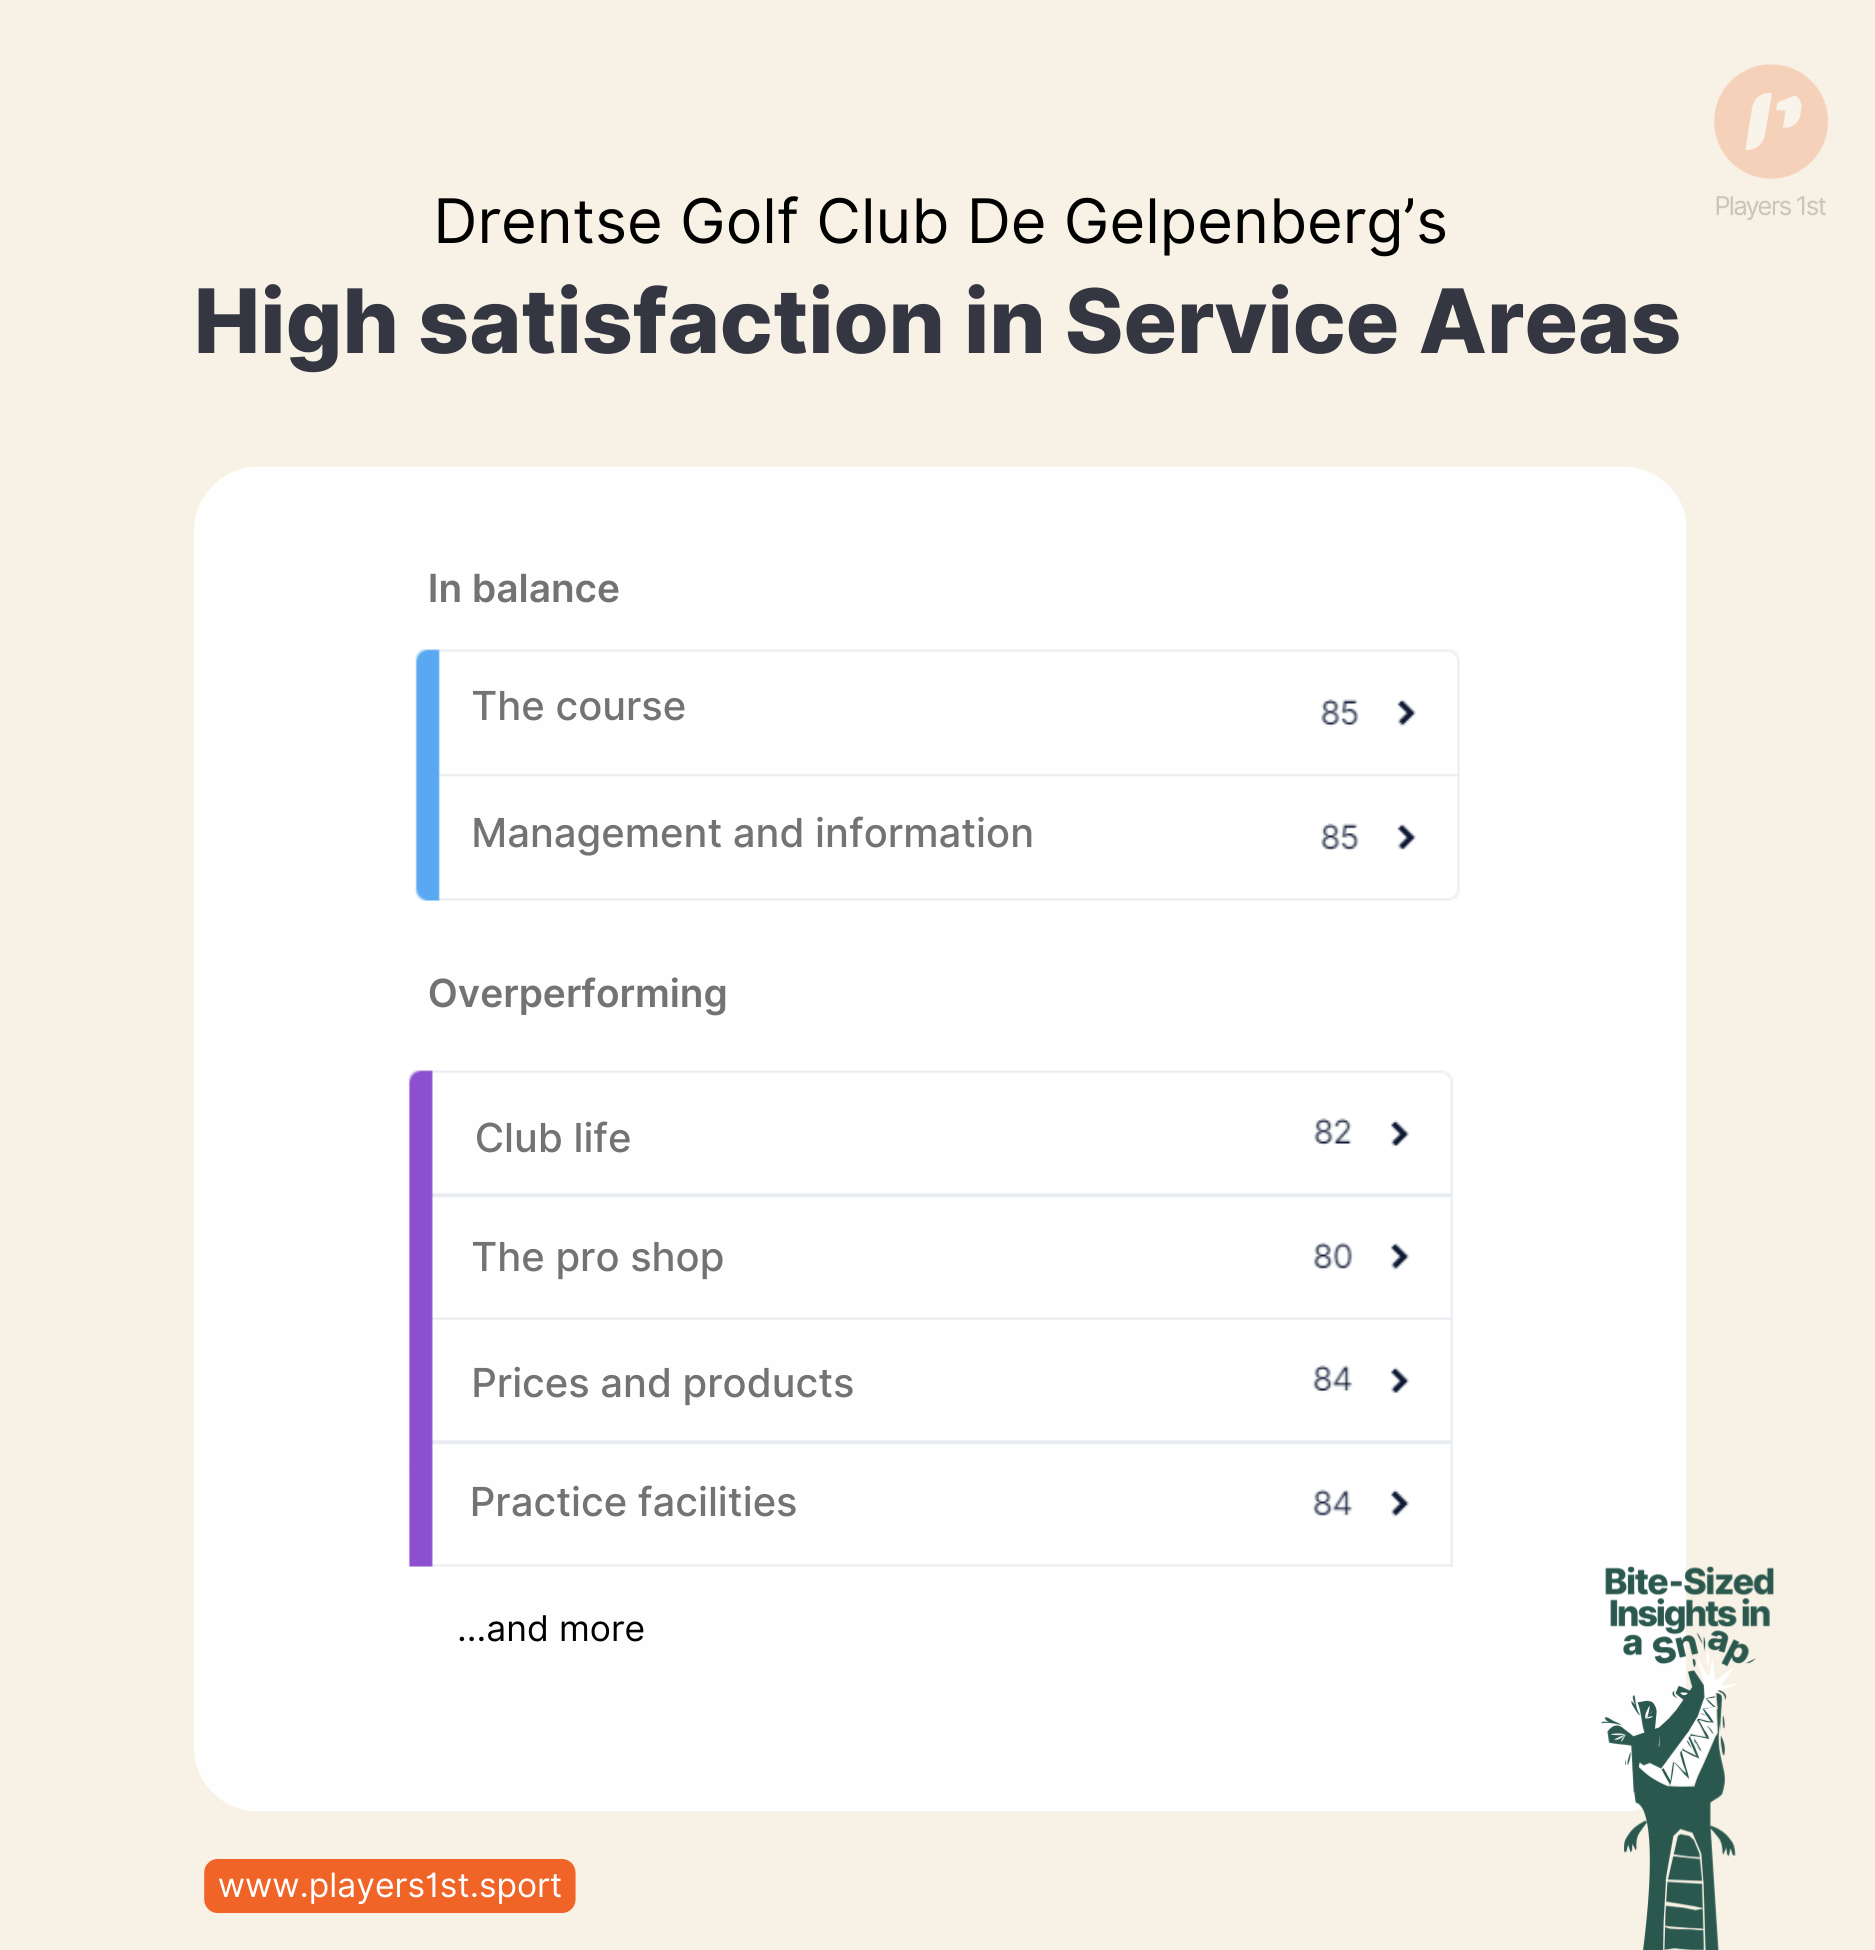 Figure 2: The ranking of satisfaction scores in various service areas at Drentse Golfclub De Gelpenberg. Source: Players 1st